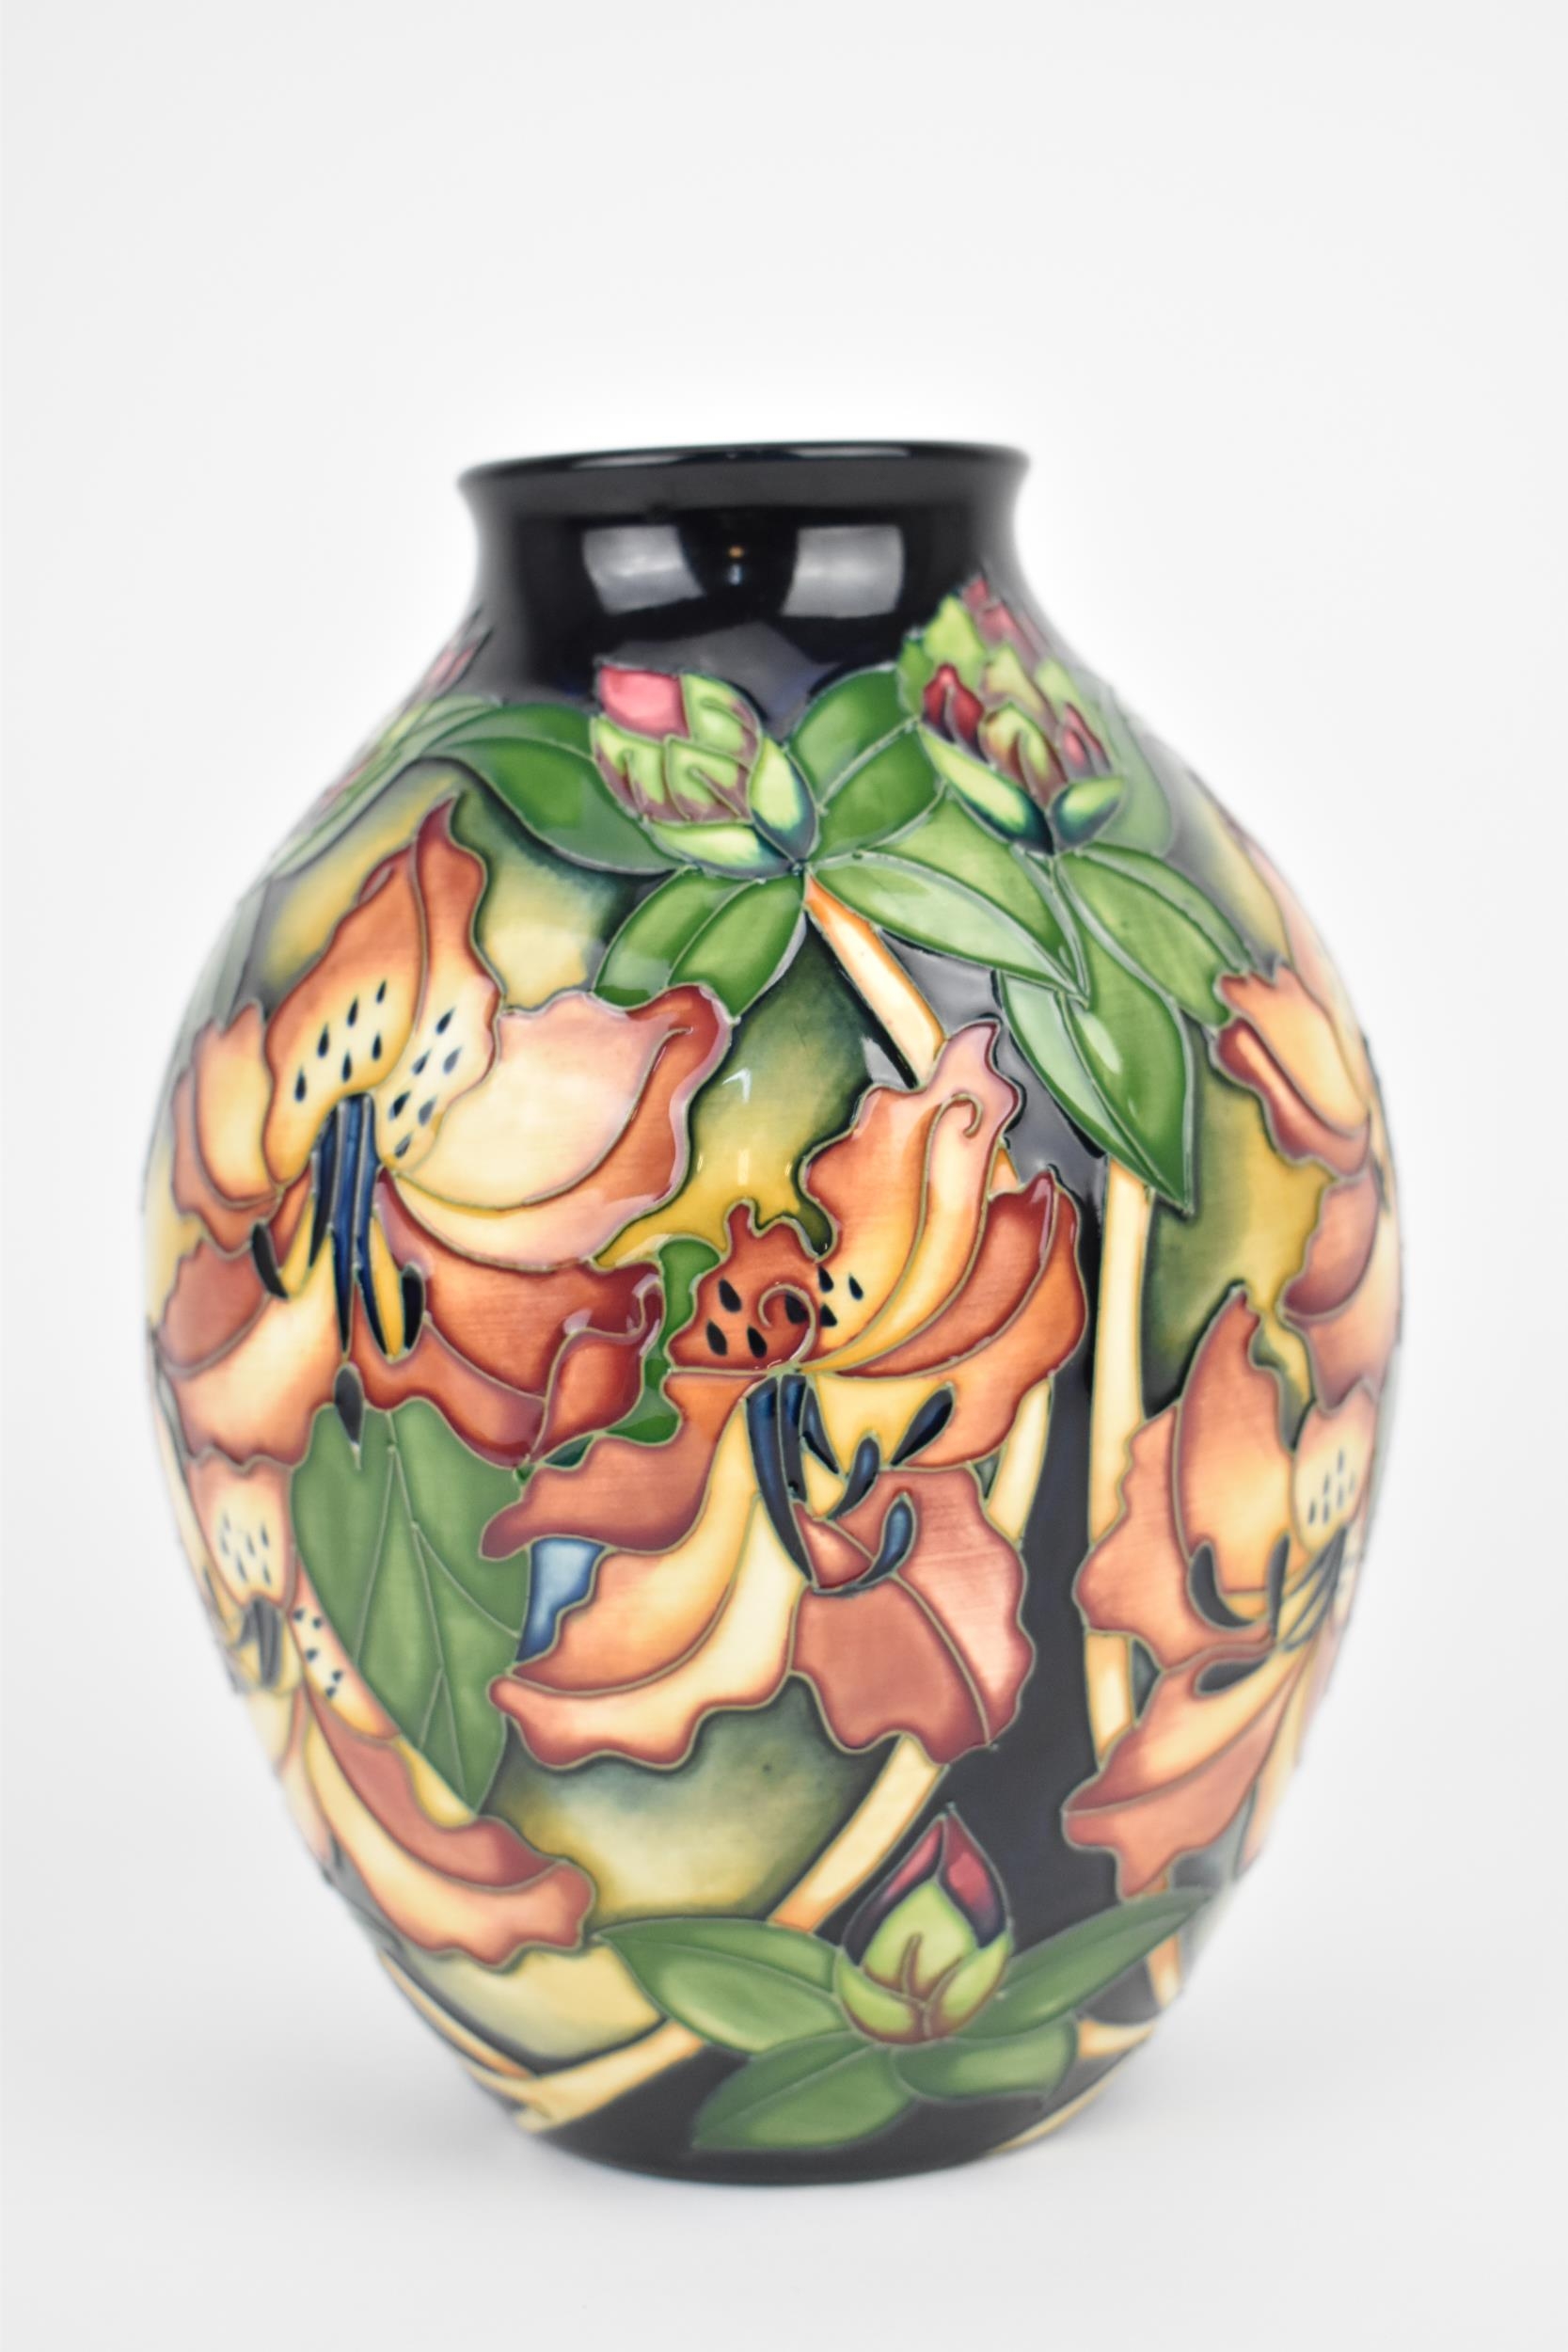 A Moorcroft ceramic vase in the Amberslade pattern from the New Forest collection designed by Rachel - Image 3 of 4